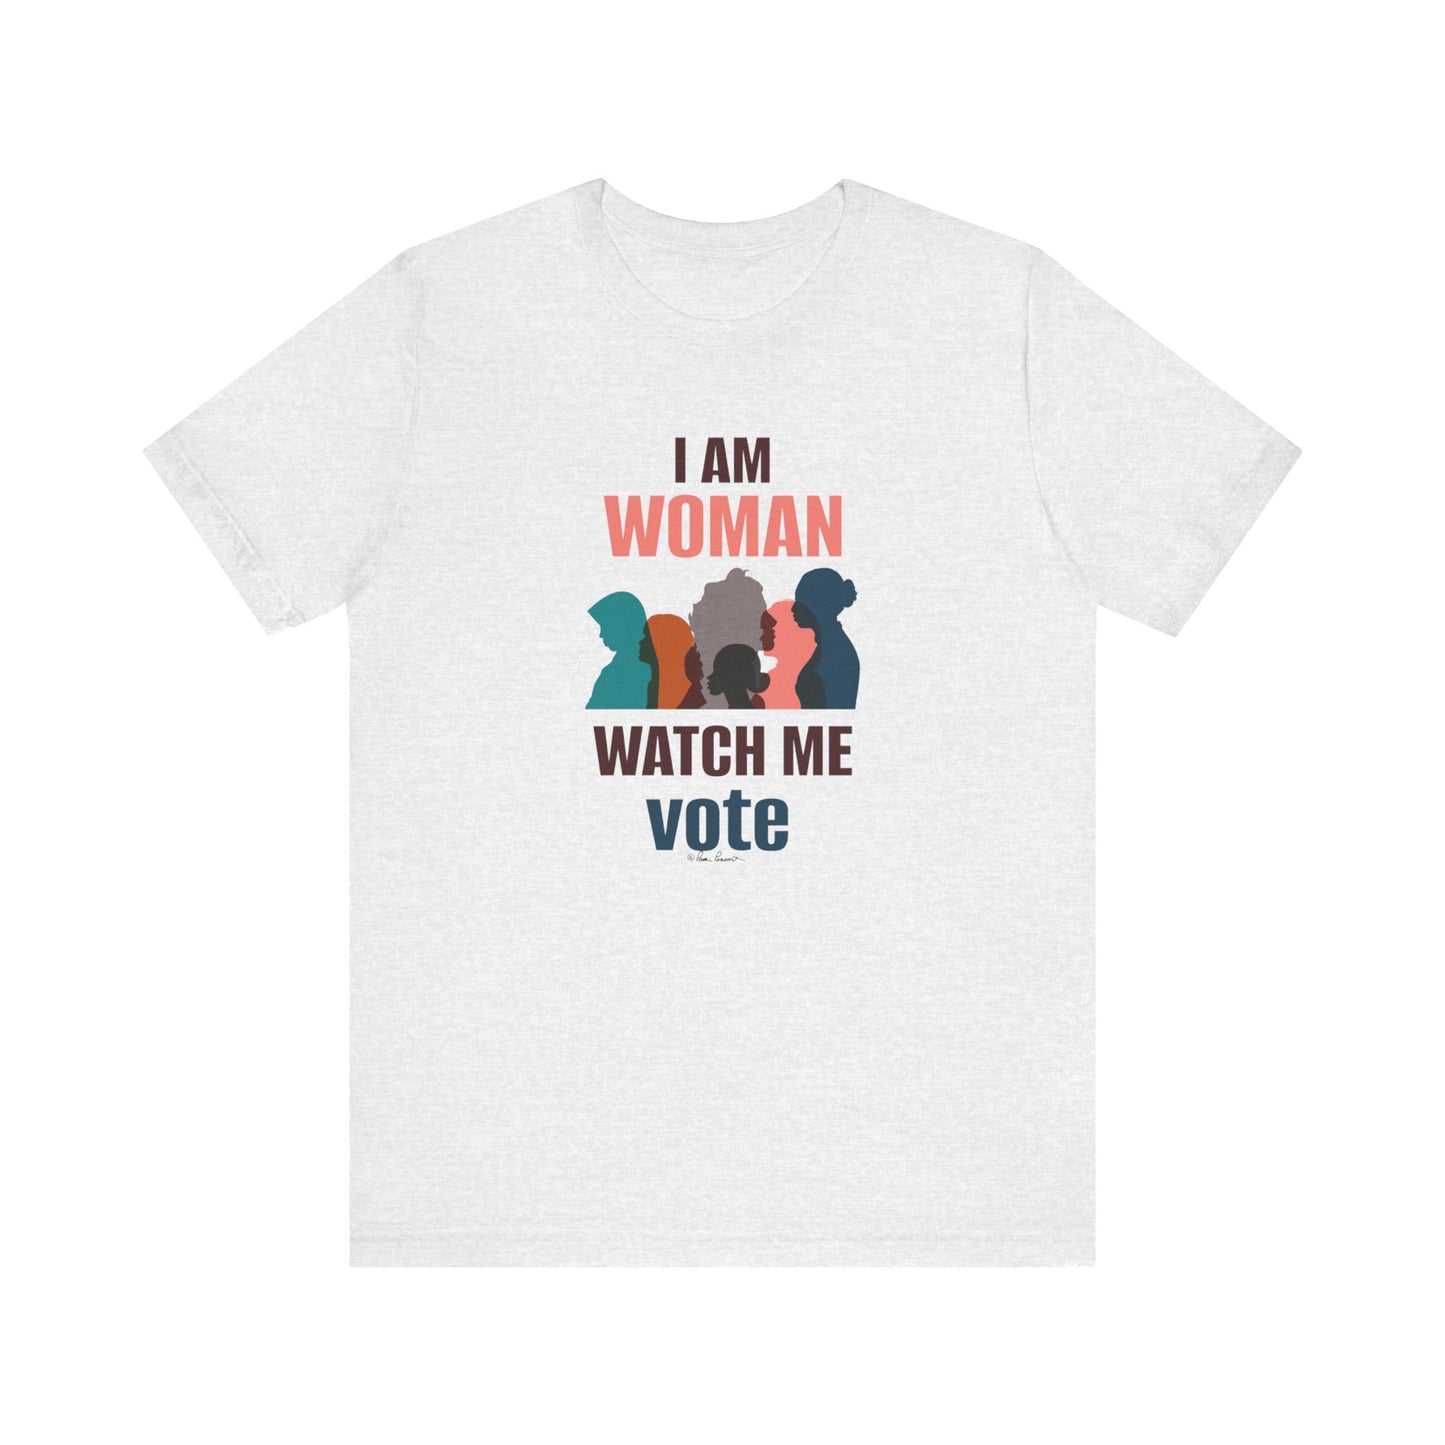 White Voting Women's T-shirt by Bella+Canvas with the text "i am woman watch me vote" and a graphic of four stylized women's silhouettes in different colors, printed by Printify.